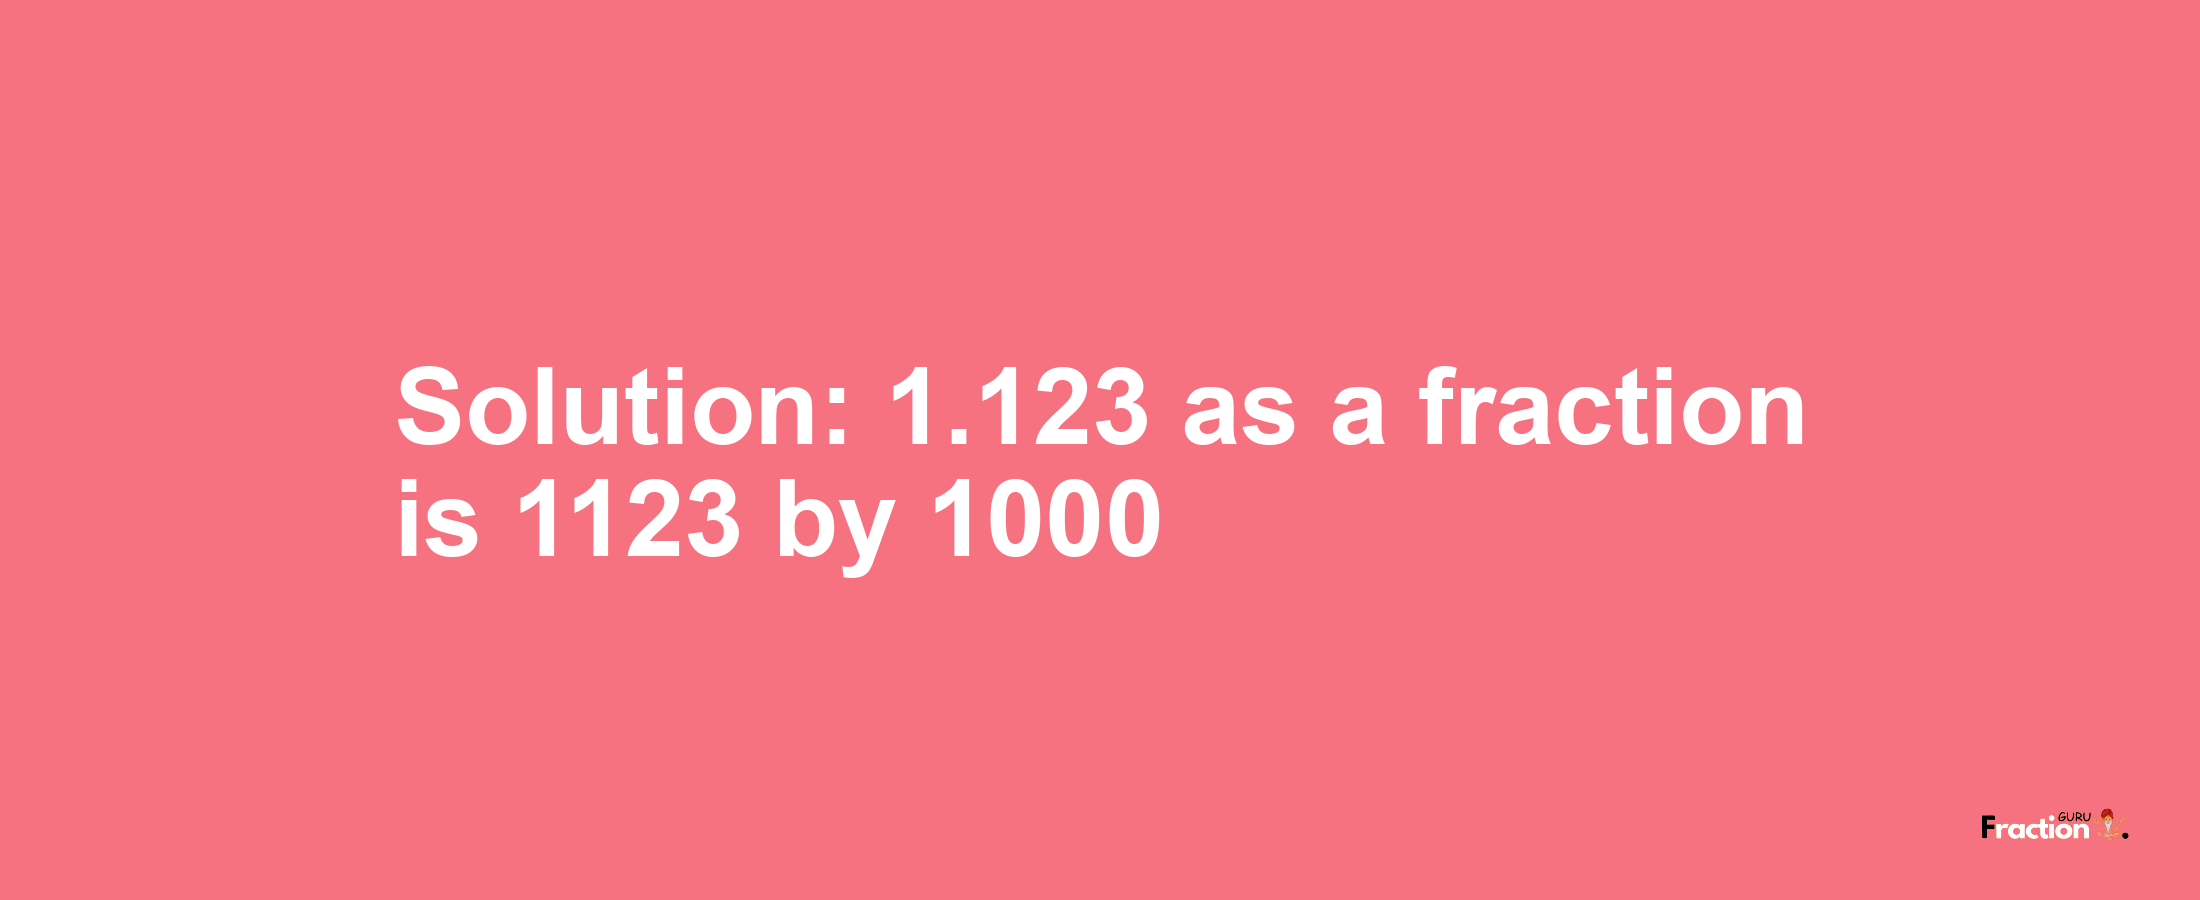 Solution:1.123 as a fraction is 1123/1000